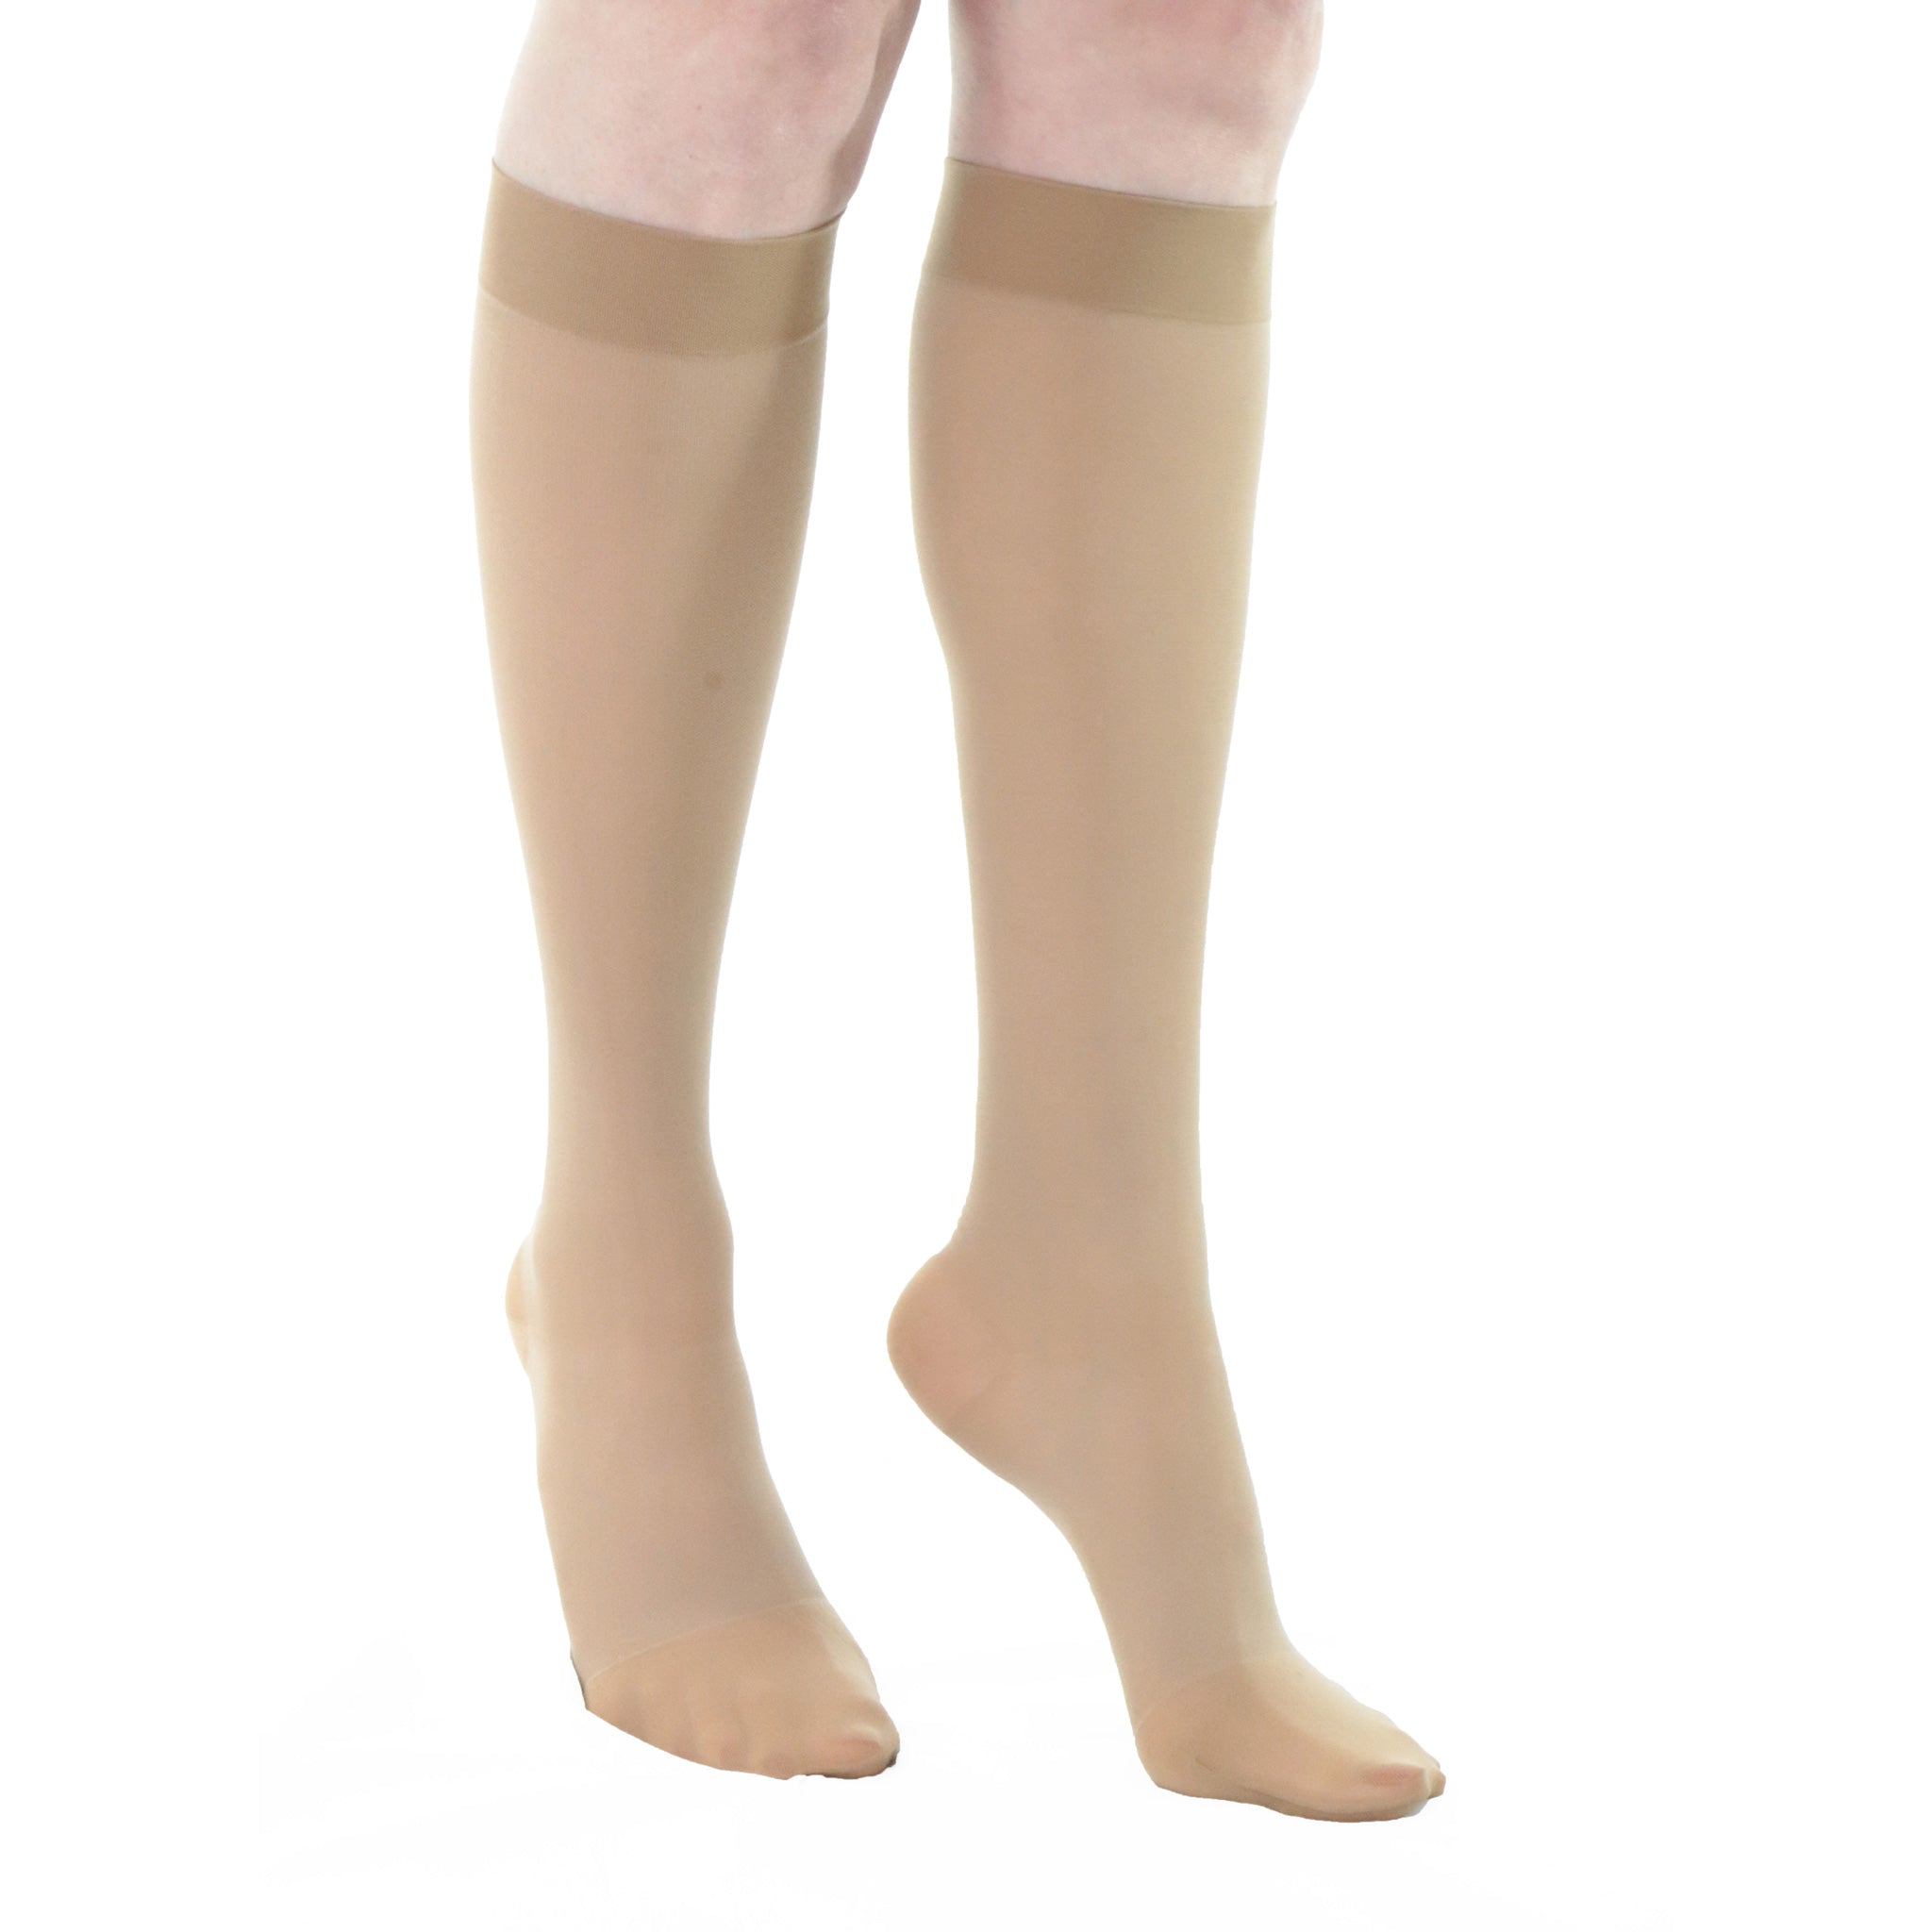 Doctor Brace CircuTrend under knee compression stockings 20 30 mmHg in beige color left side view